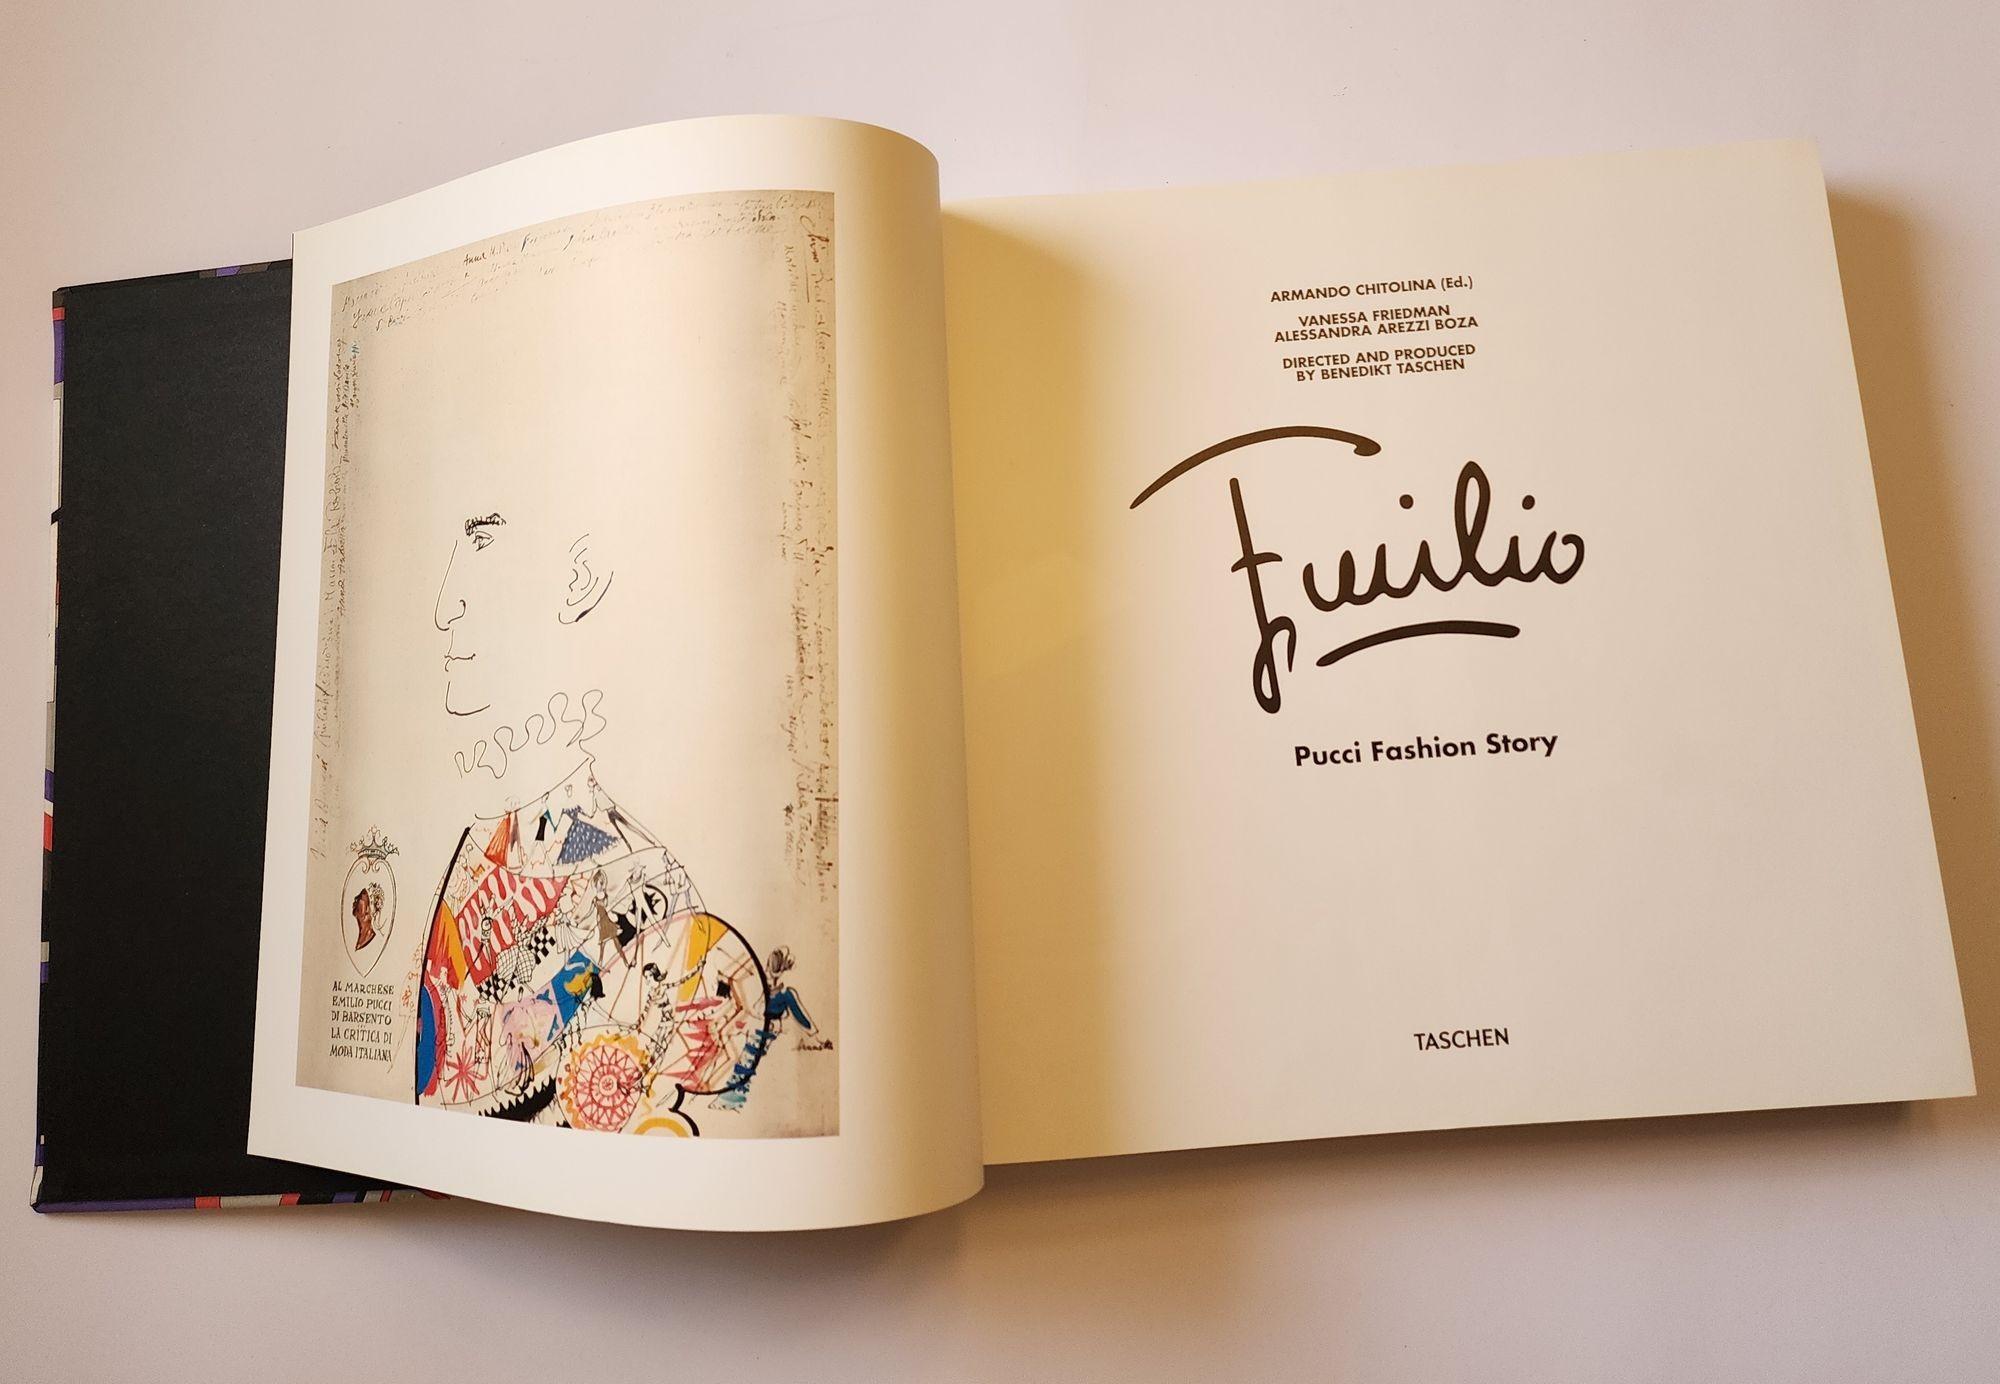 Post-Modern Emilio Pucci - Fashion Story -Limited Edition Taschen 2010 For Sale